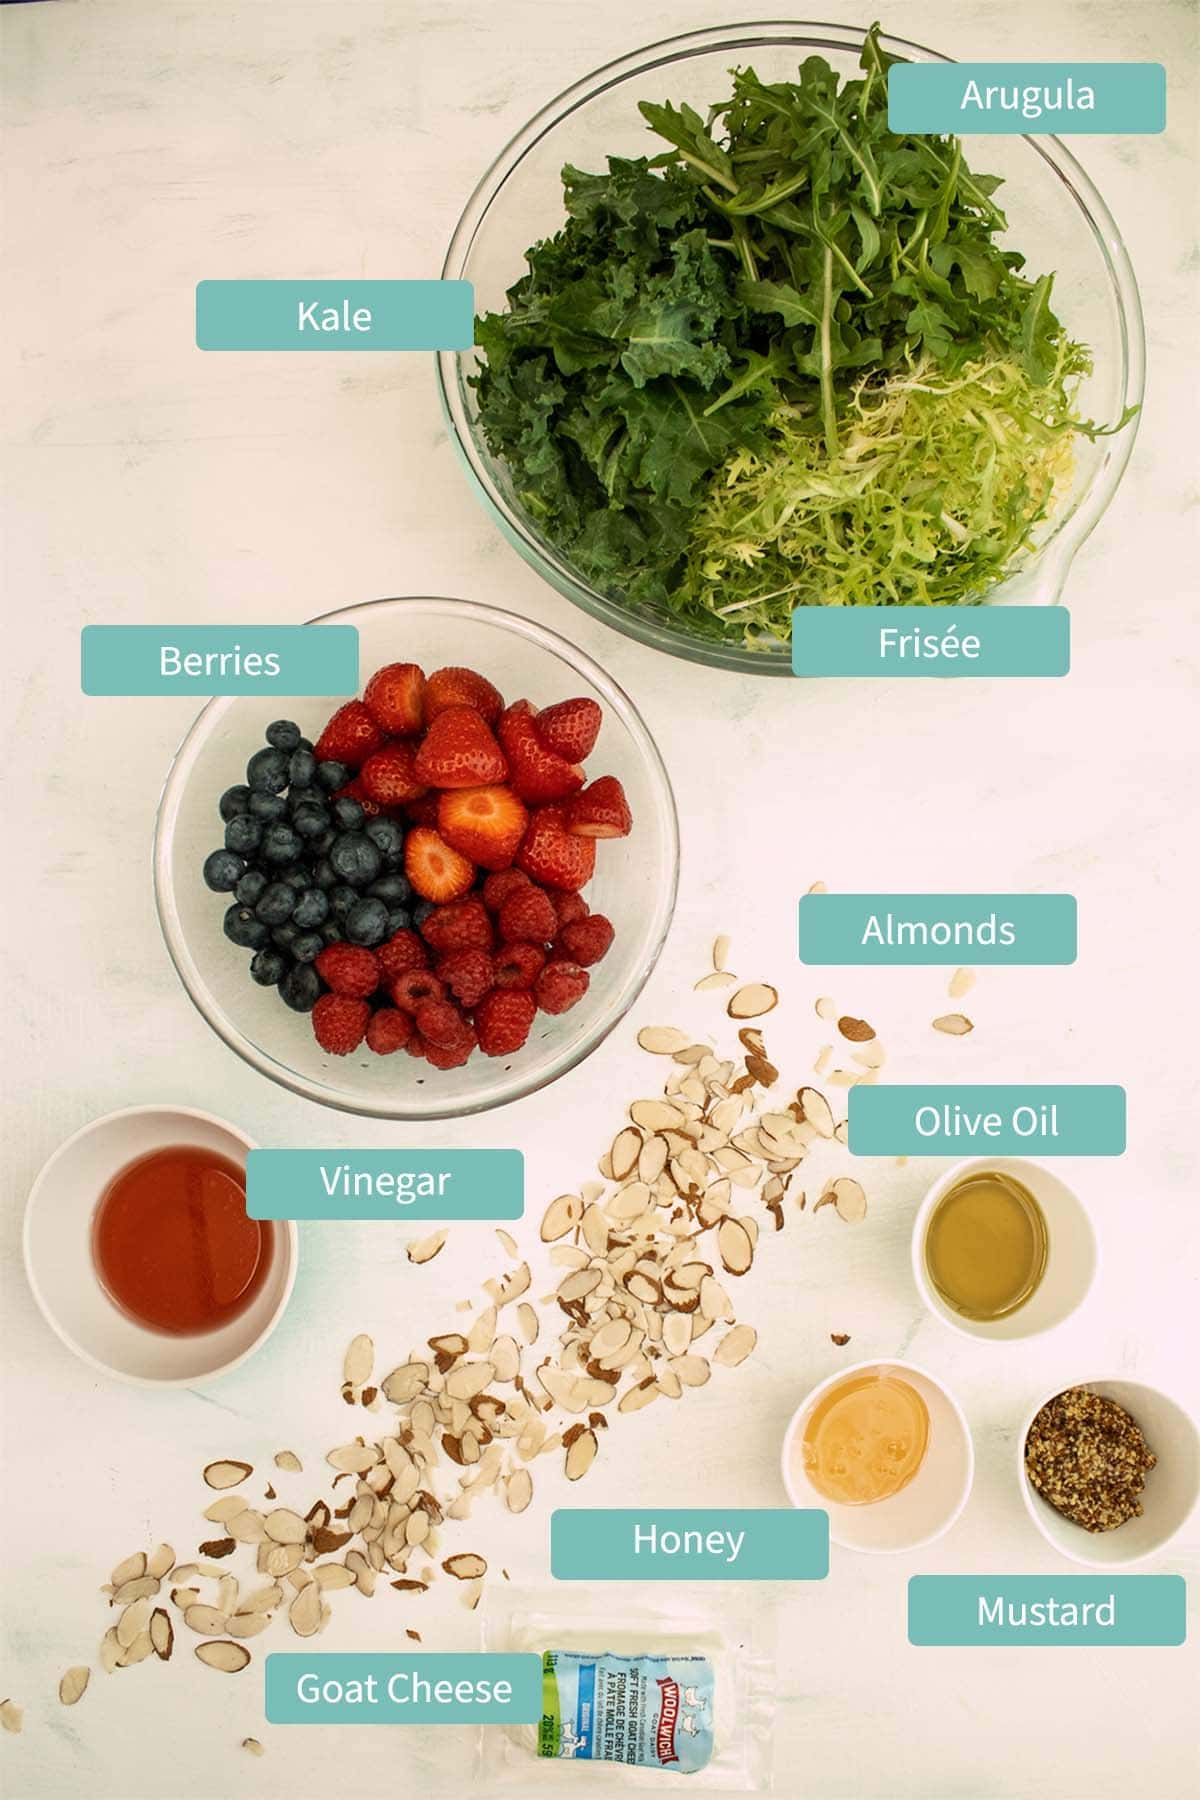 Ingredients for the kale salad